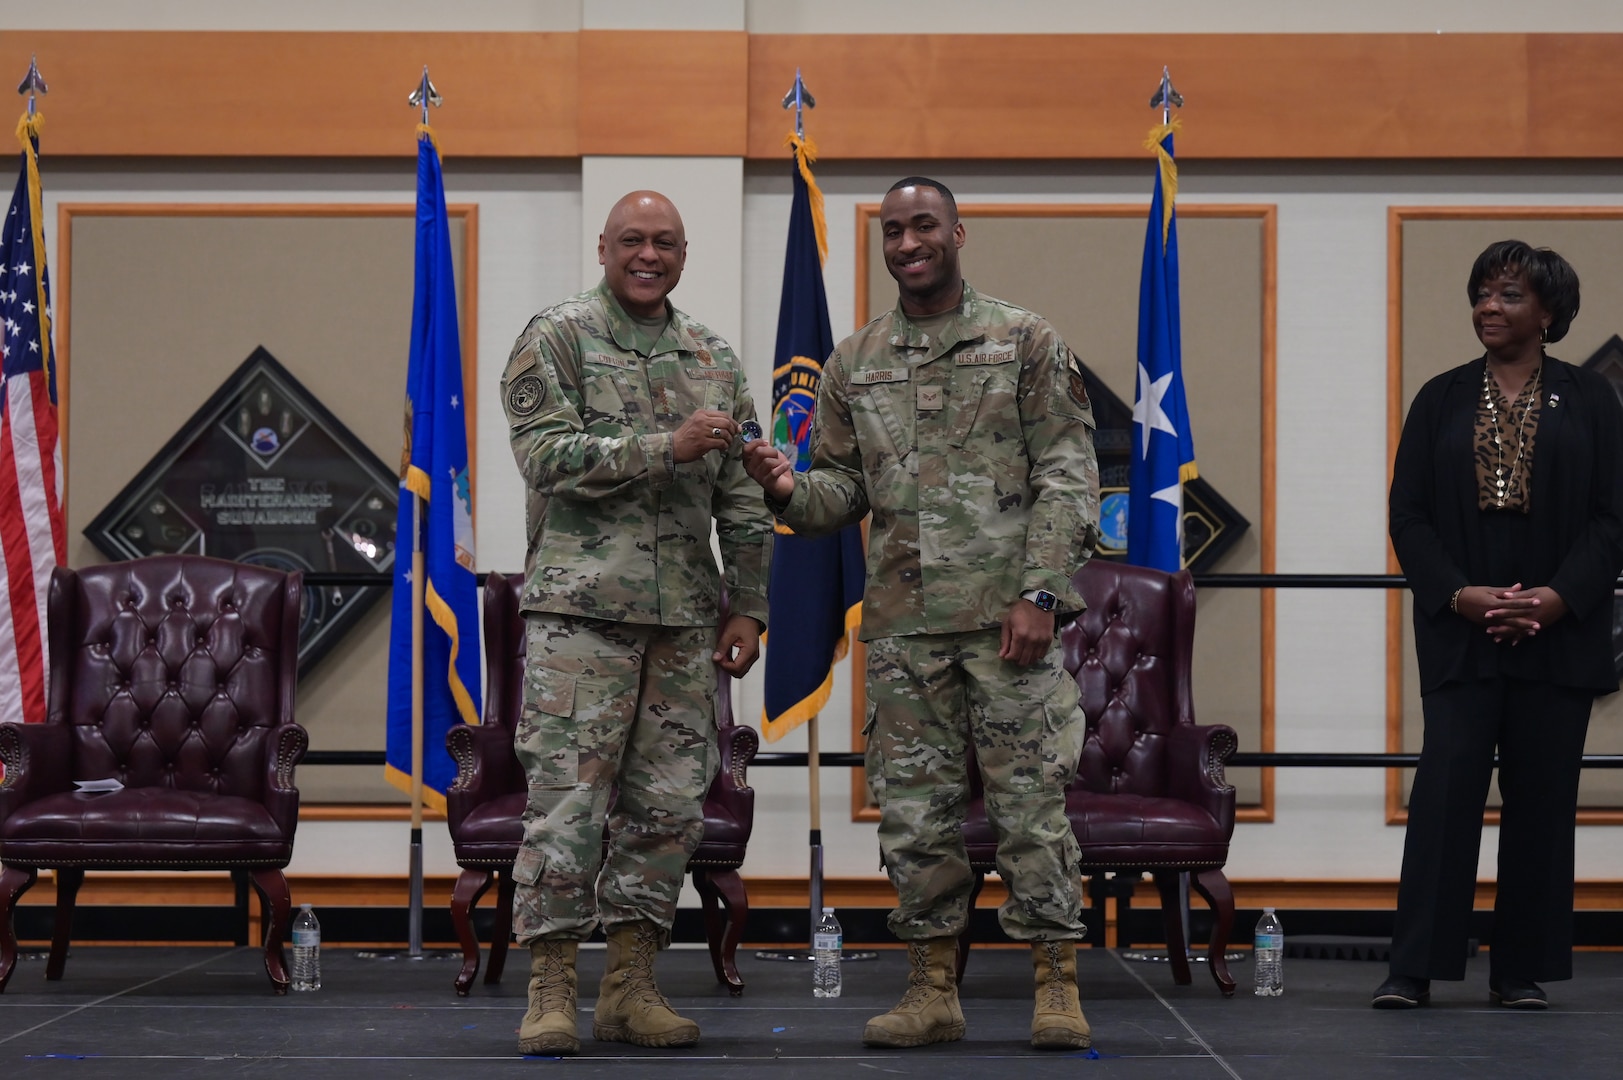 Two men in military uniform stand on stage as they hold a challenge coin together and smile toward the camera.